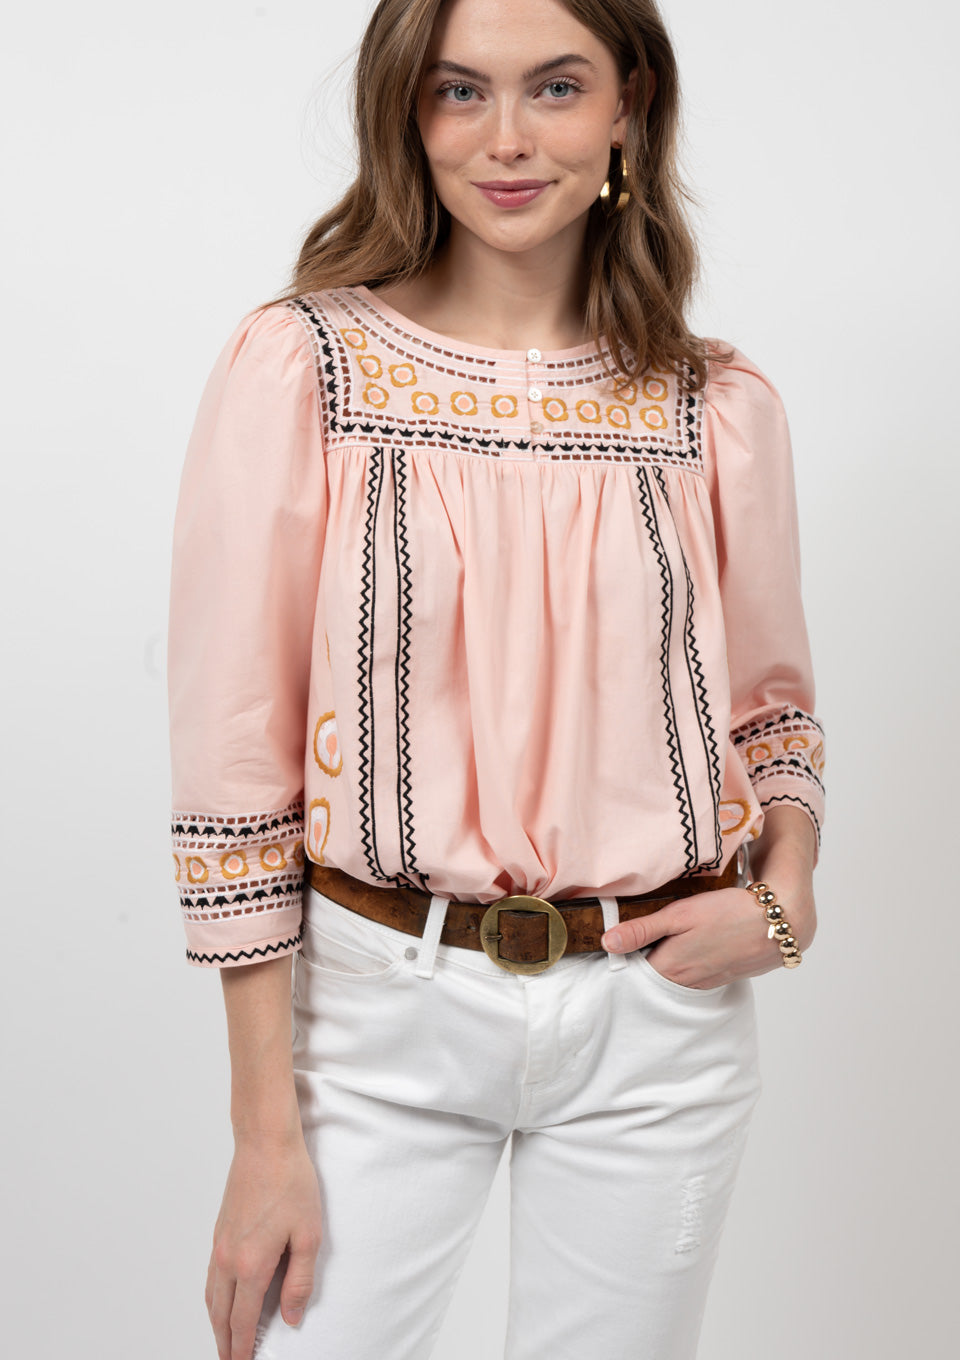 Ivy Jane Blush Petals and Pearls Top